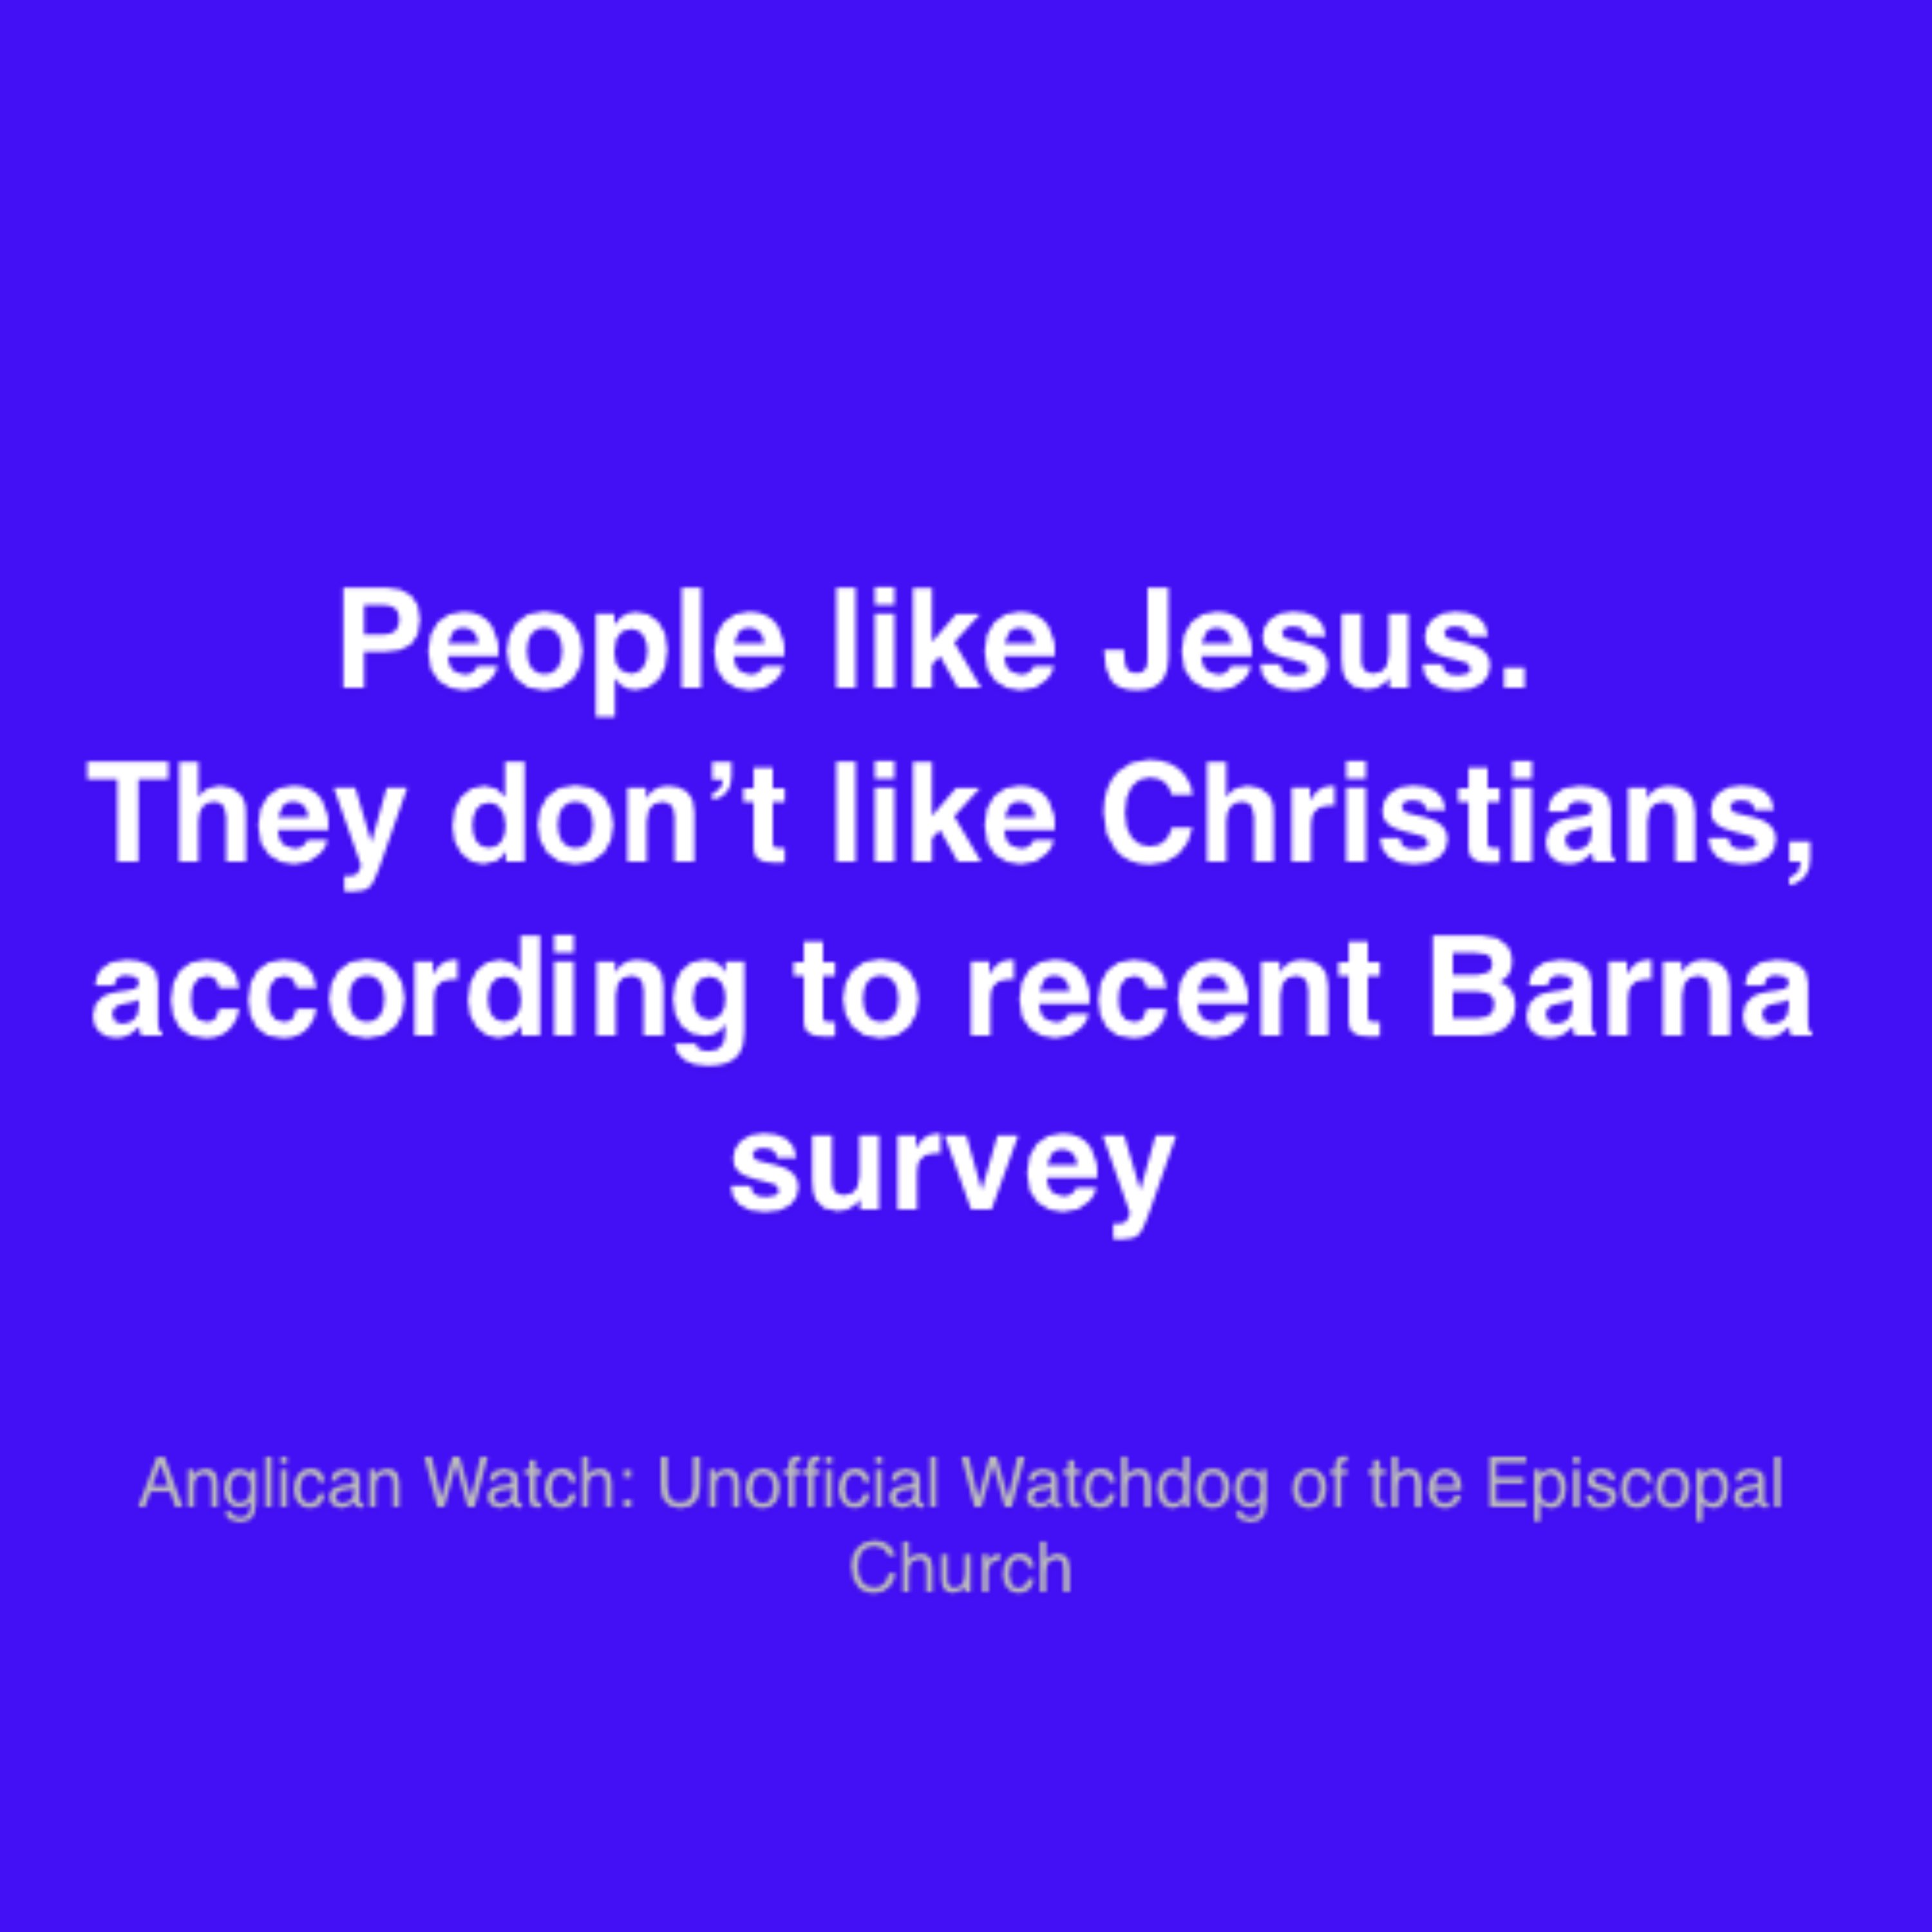 People like Jesus. They don’t like Christians, according to recent Barna survey